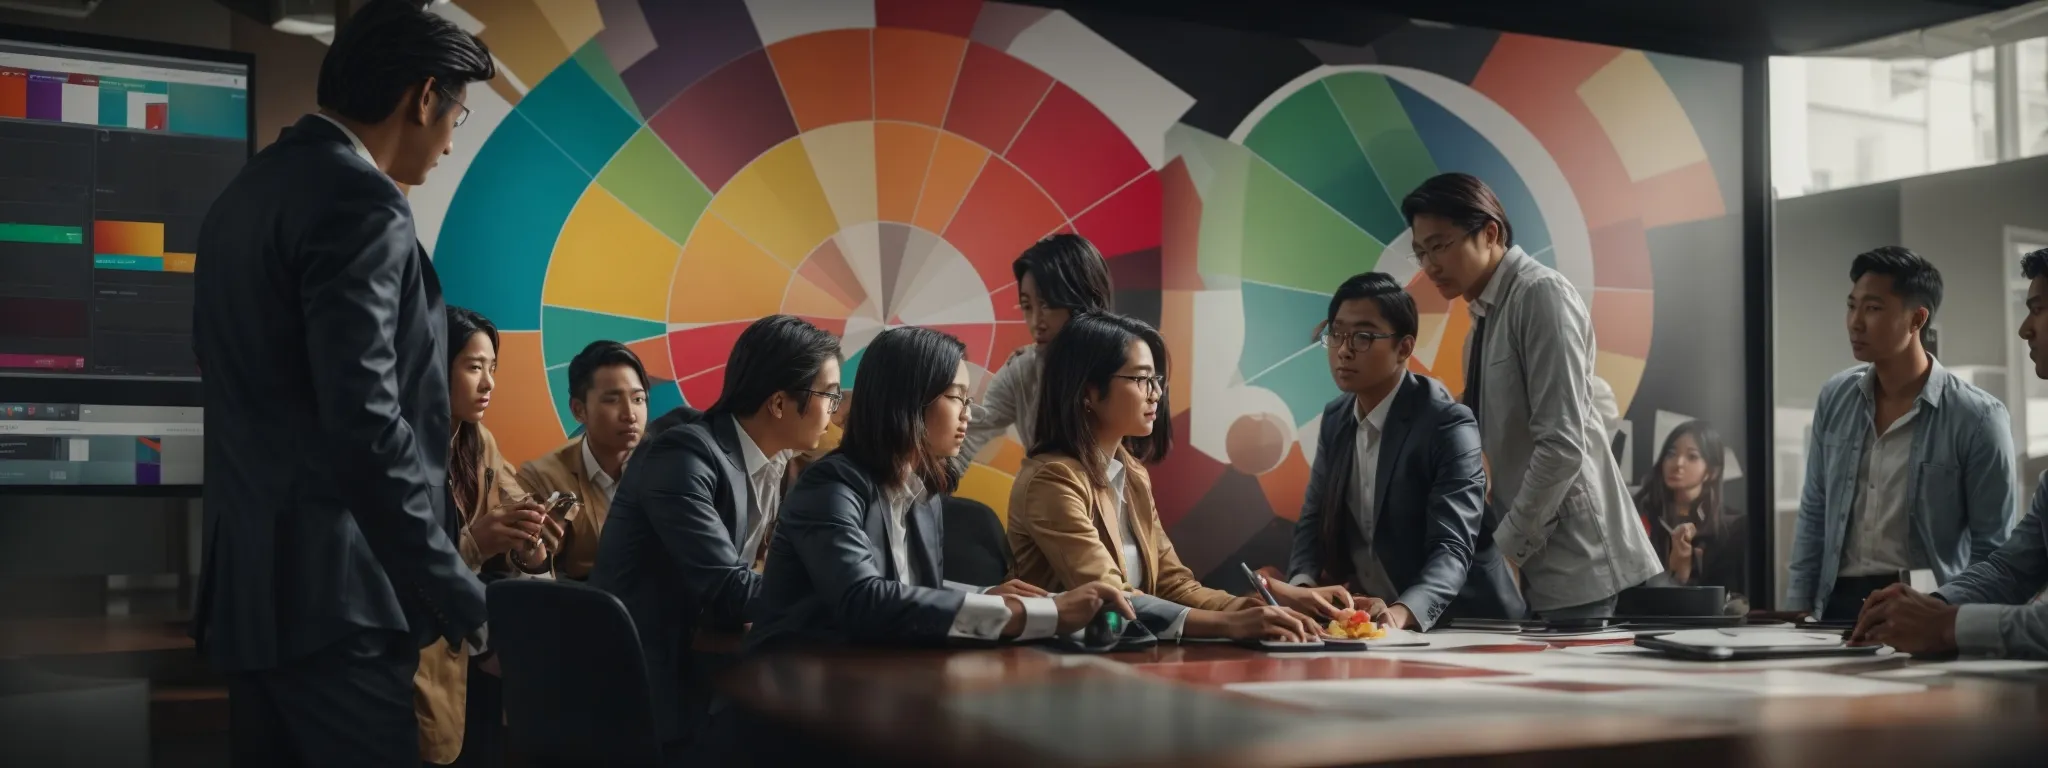 a team of seo professionals gathered around a large digital screen, analyzing and discussing a colorful pie chart representing local market outreach through various google plus features.